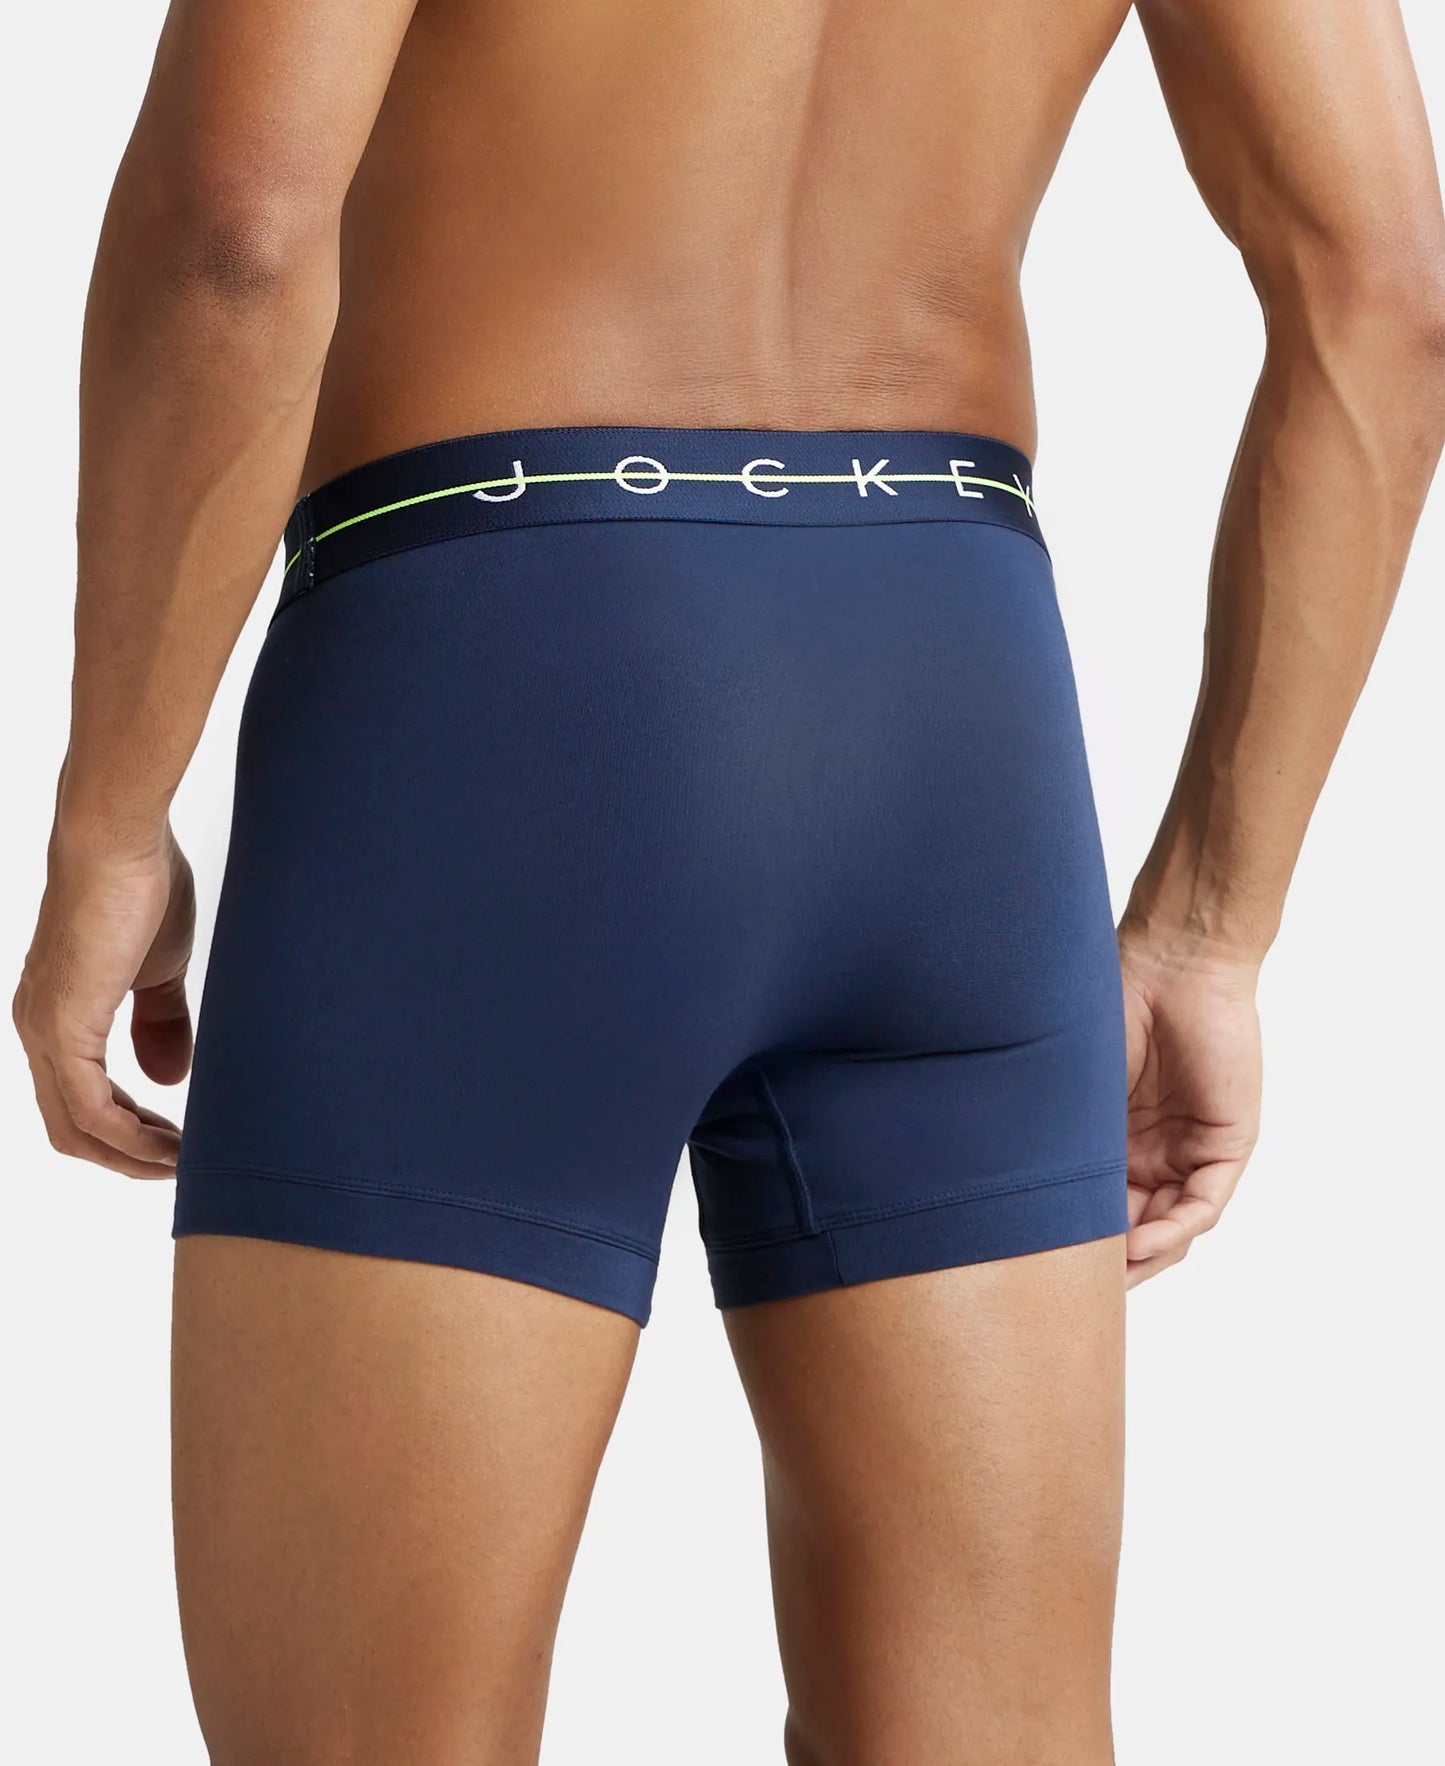 Super Combed Cotton Elastane Solid Trunk with Ultrasoft Waistband - Navy-3